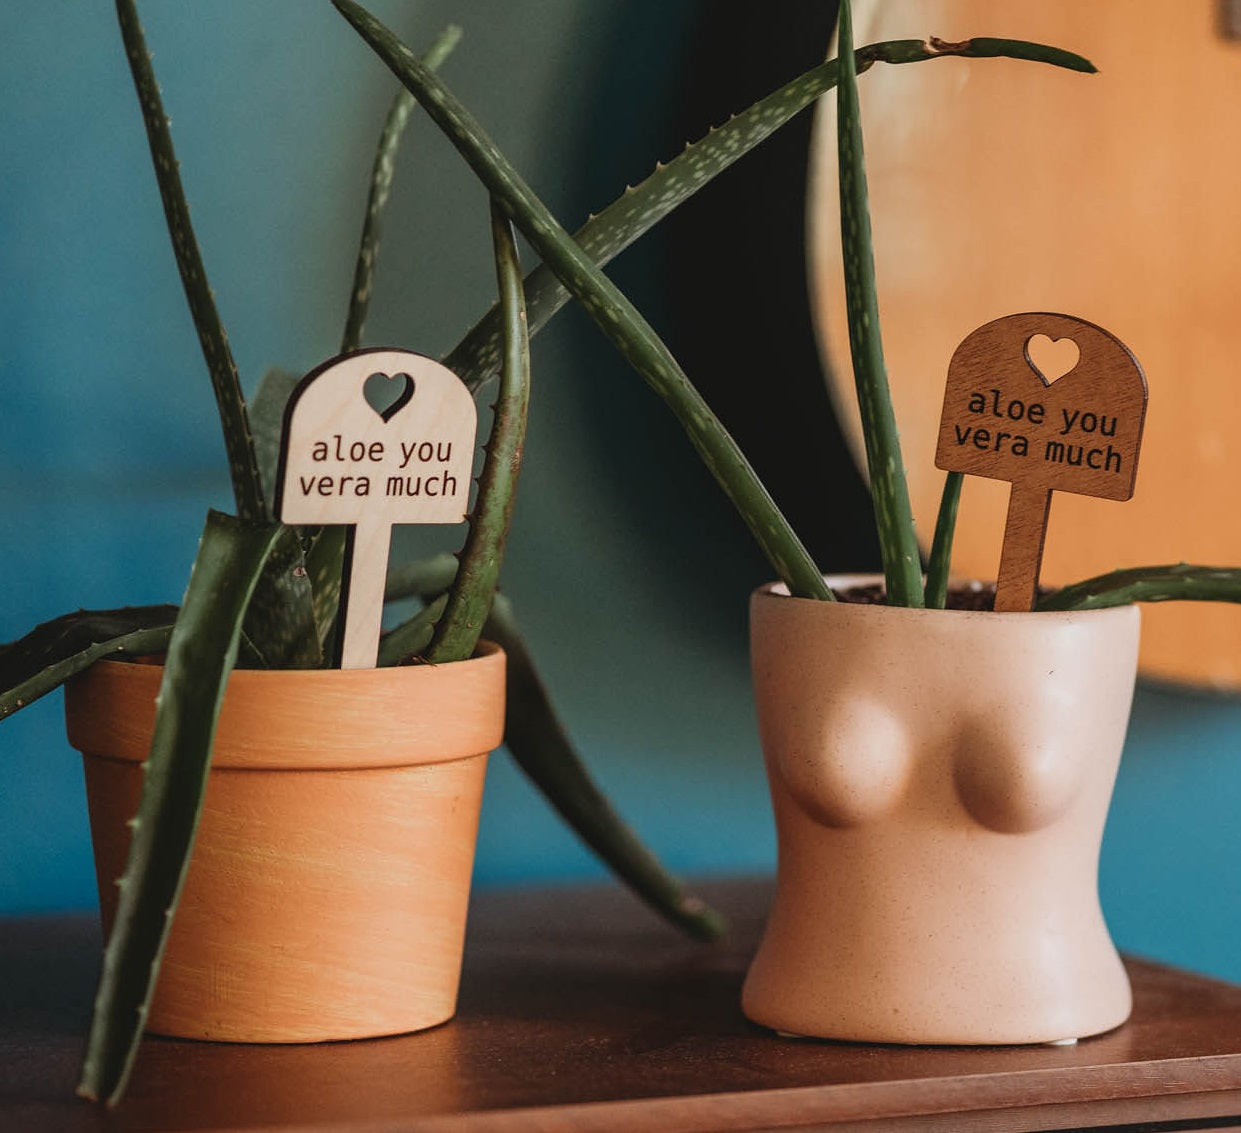 Two potted aloe plants are showcased on a wooden surface, each adorned with a plant marker playfully reading 'aloe you vera much'. One plant sits in a classic terracotta pot, while the other is housed in a unique, ceramic pot with a human-like shape. This juxtaposition creates an eye-catching contrast, merging the natural with the anthropomorphic. To the right, a partial view of an acoustic guitar hangs on a vibrant blue wall.